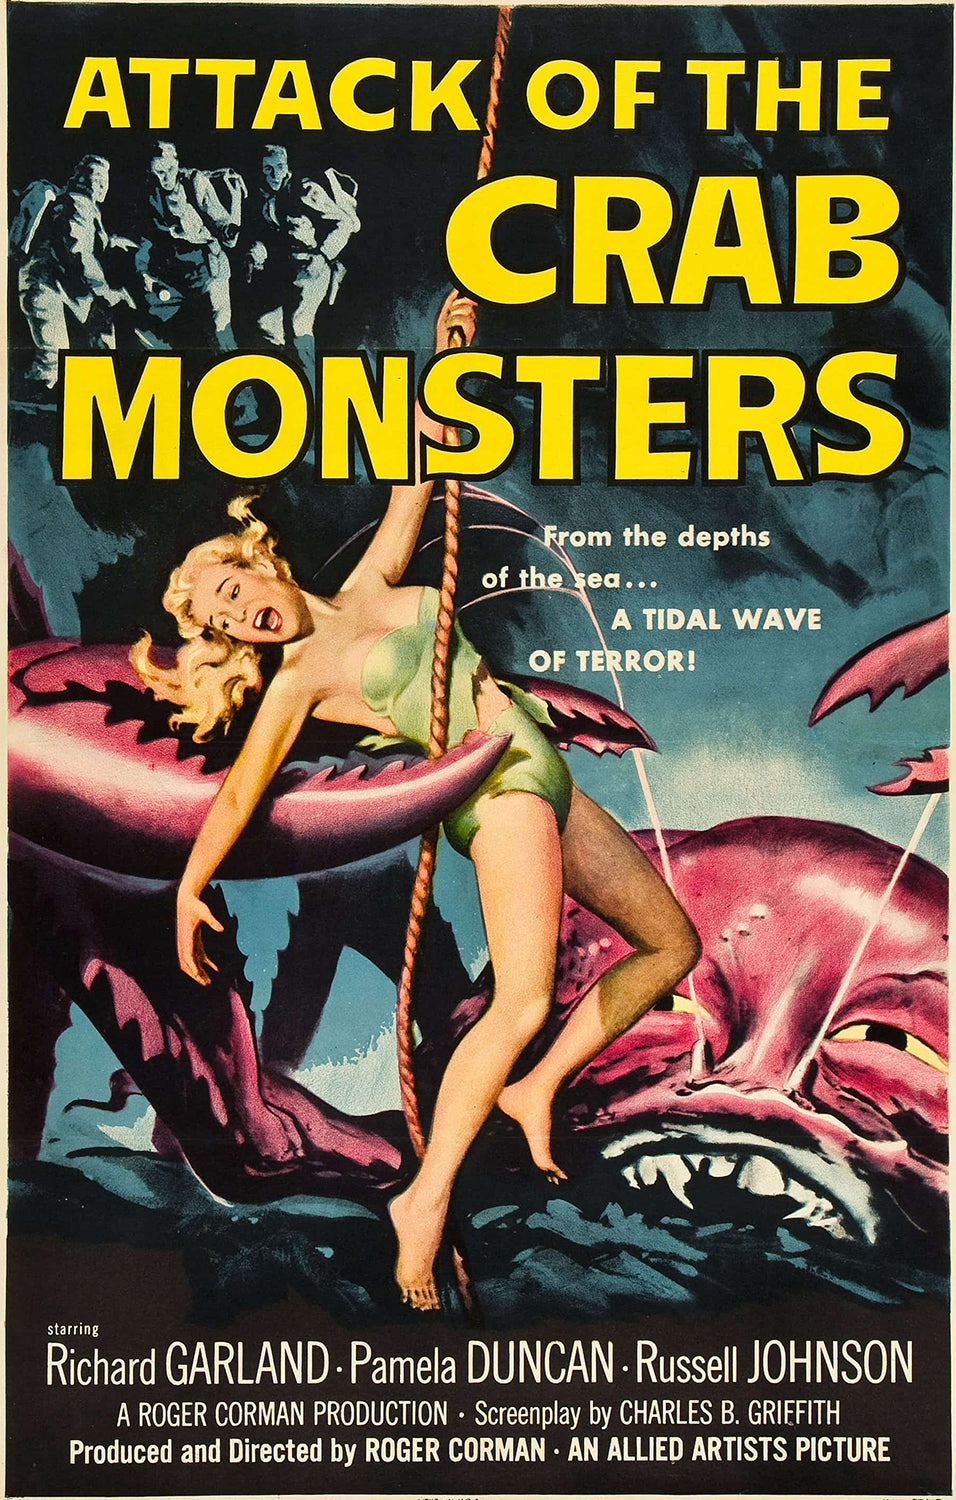 Attack of The Crab Monsters (1957) Vintage Horror Movie Poster